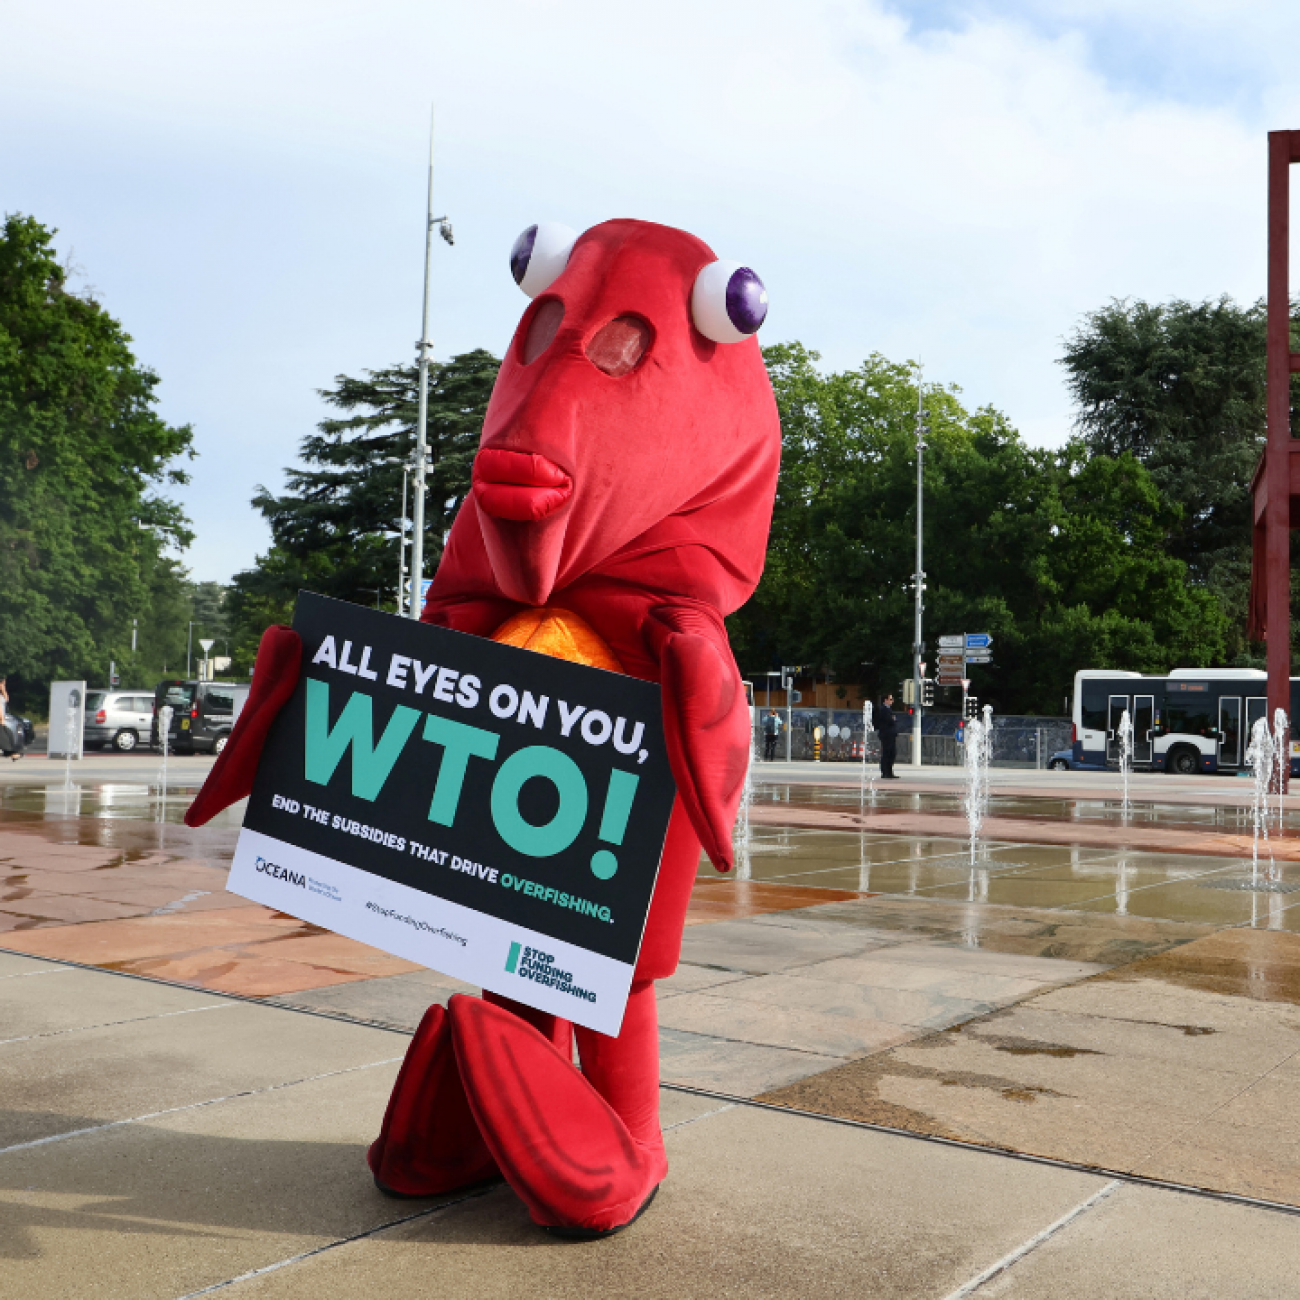 Finley the fish, a person dressed in a life-size red fish costume, poses during World Ocean Day ahead of the World Trade Organization Ministerial Conference (MC12) holding a sign to protest harmful fisheries subsidies. Photo taken in Geneva, Switzerland on June 8, 2022.